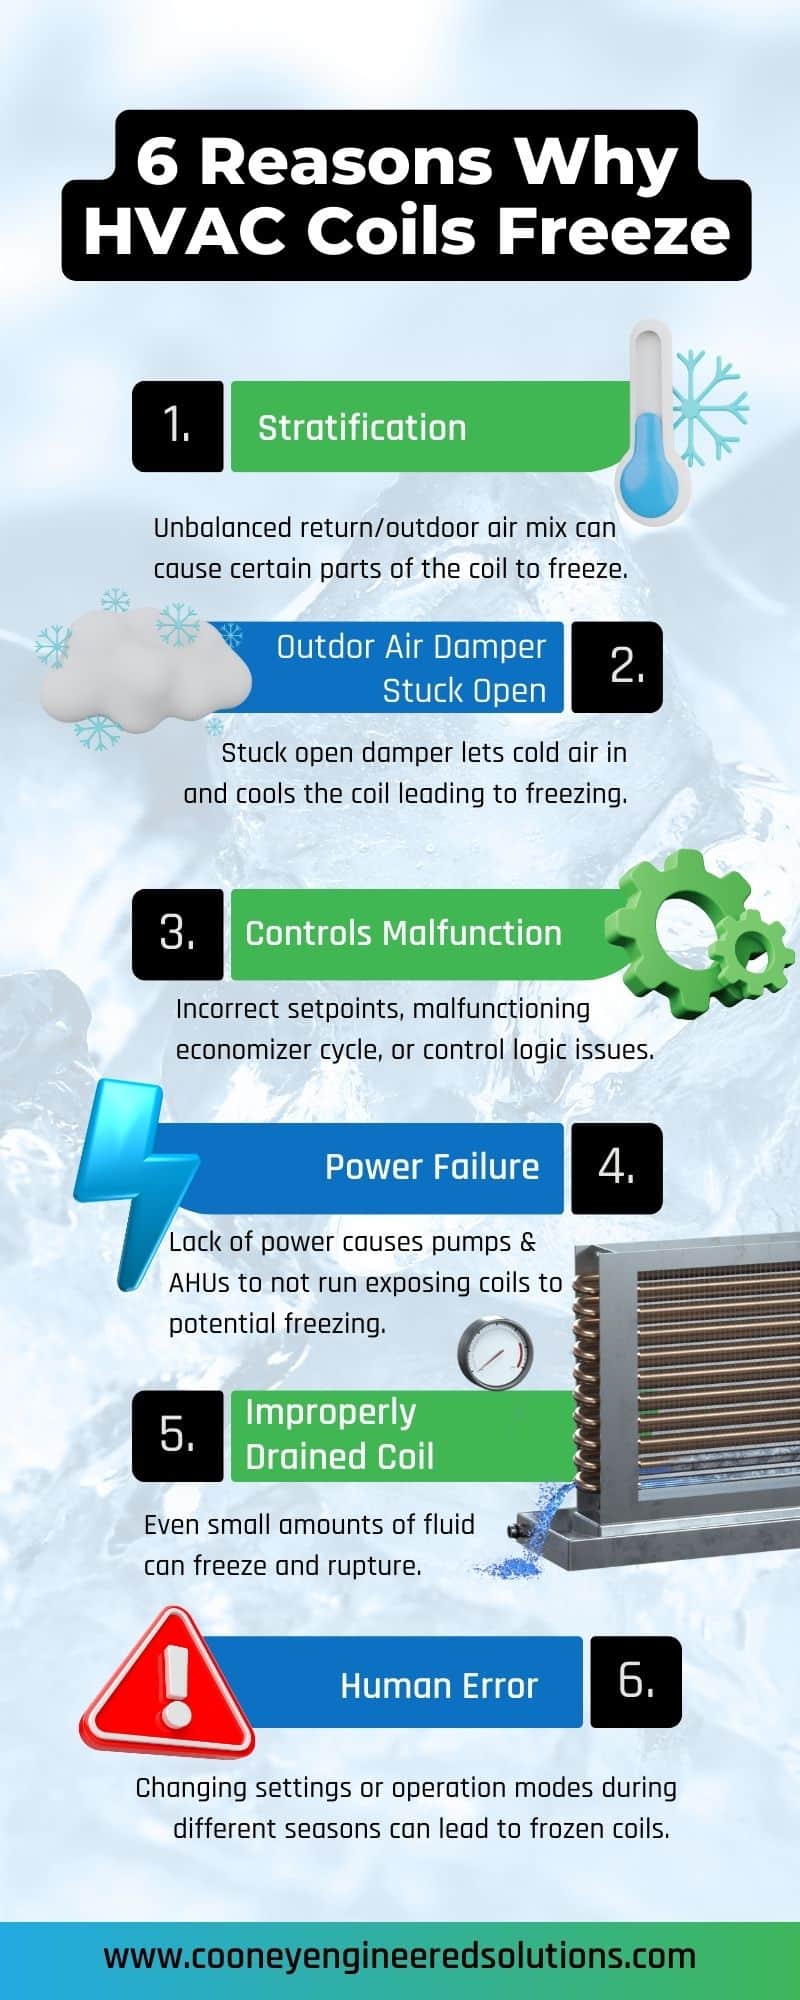 Infographic Why HVAC Coils Freeze